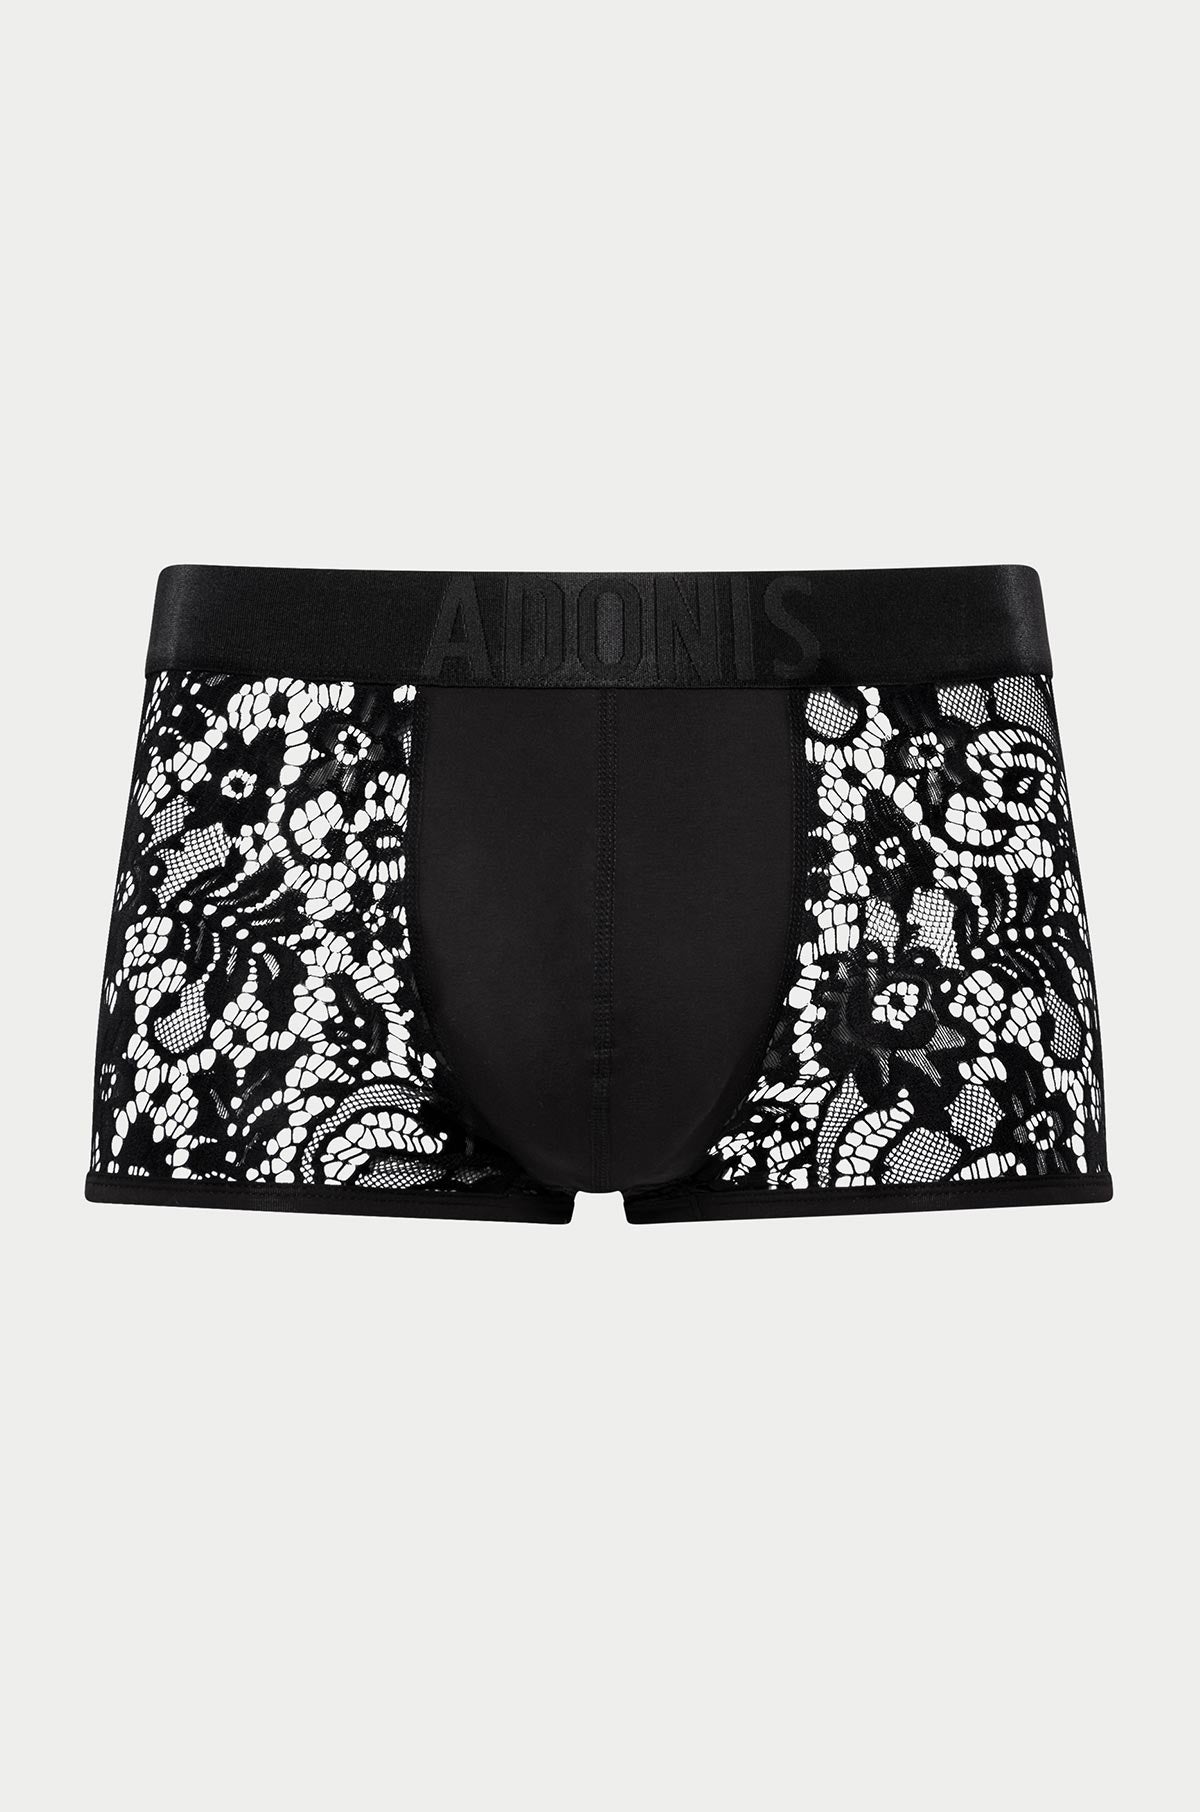 Limited Edition Sheer Lace Boxer Trunk - DealByEthan.gay